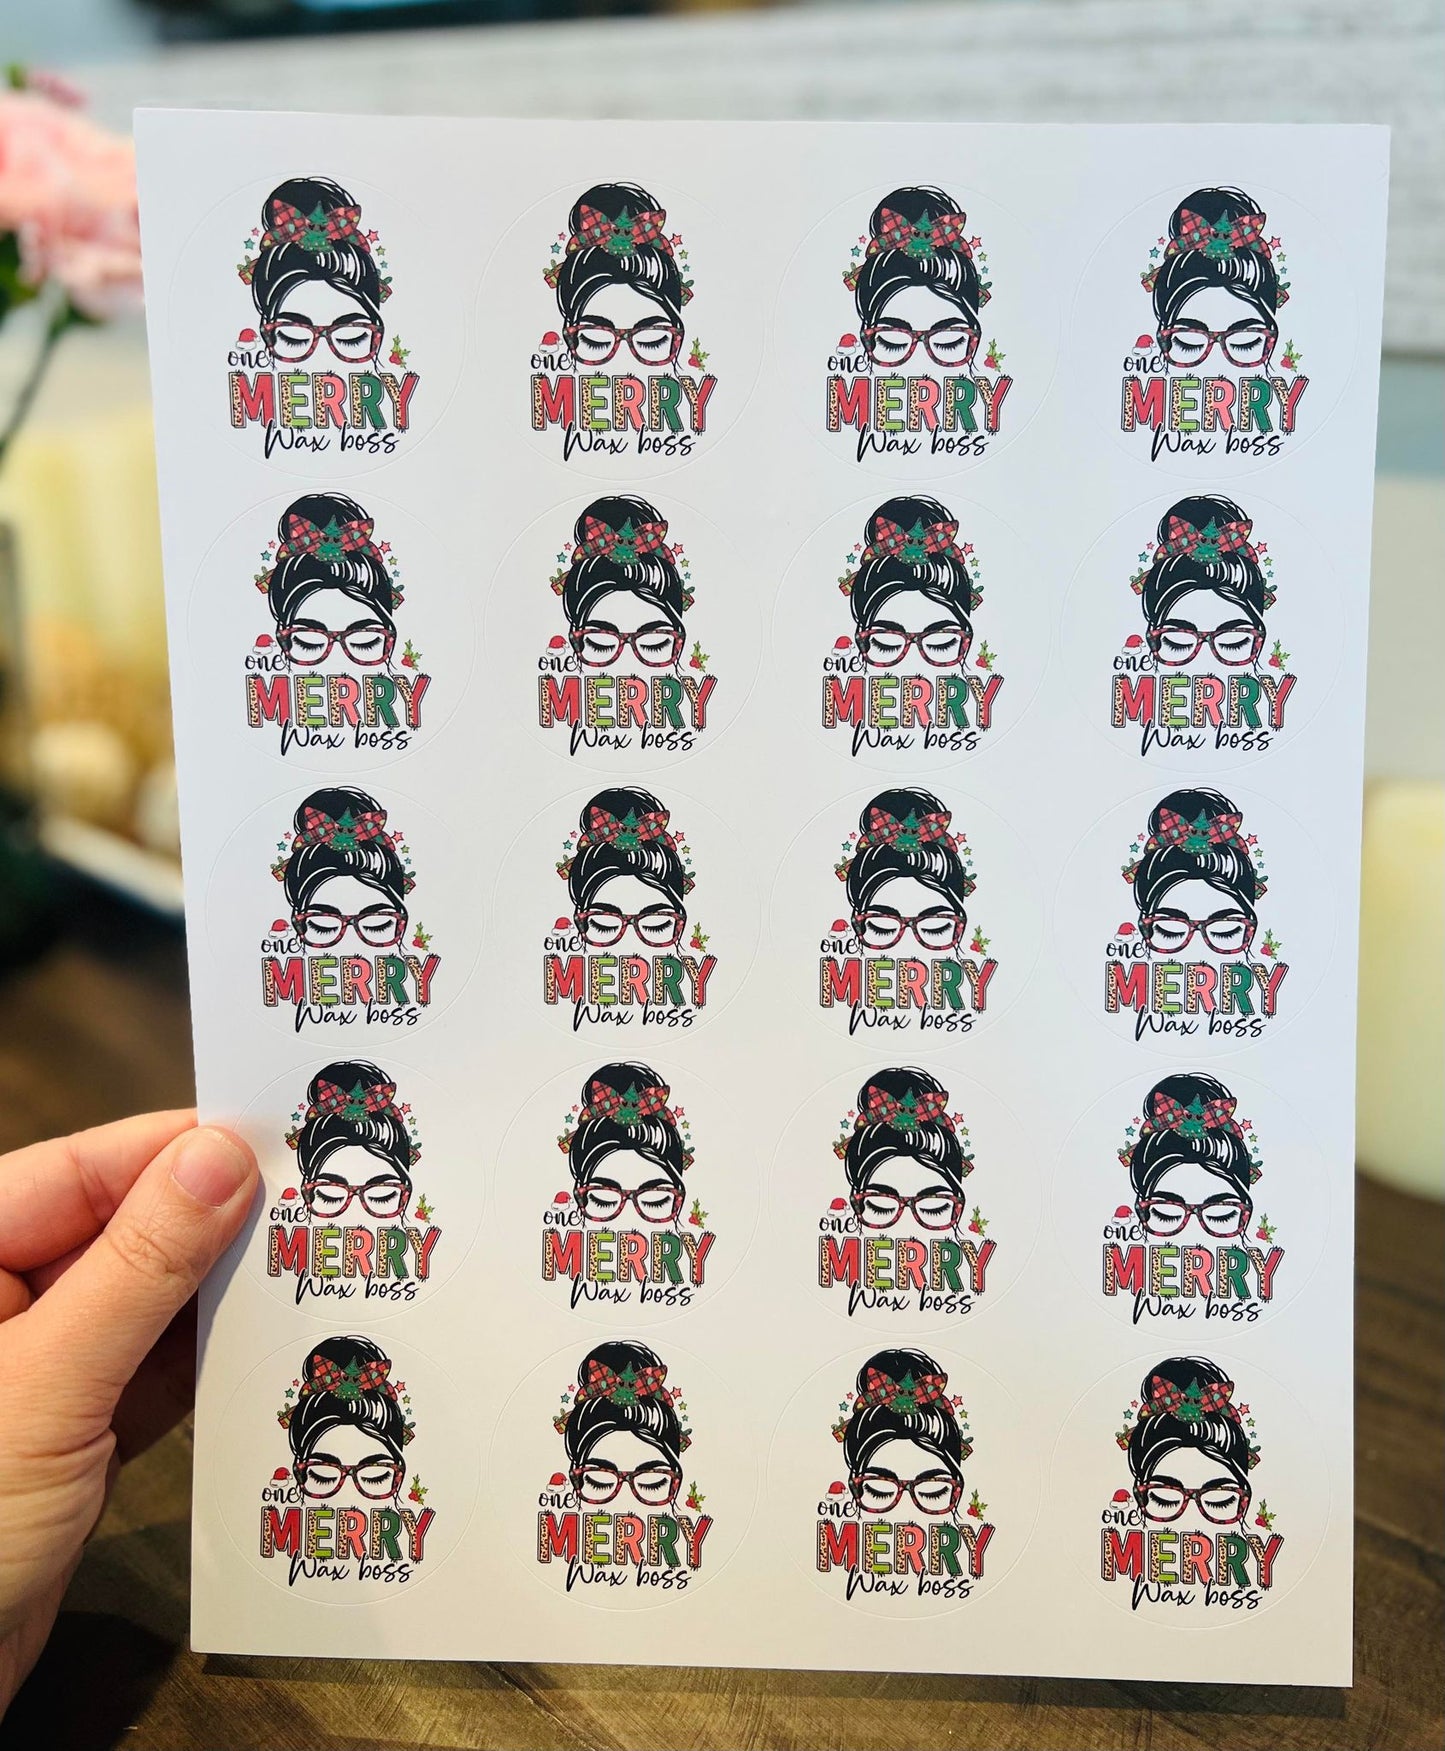 Wax Boss Stickers - Individually OR a Bundle!